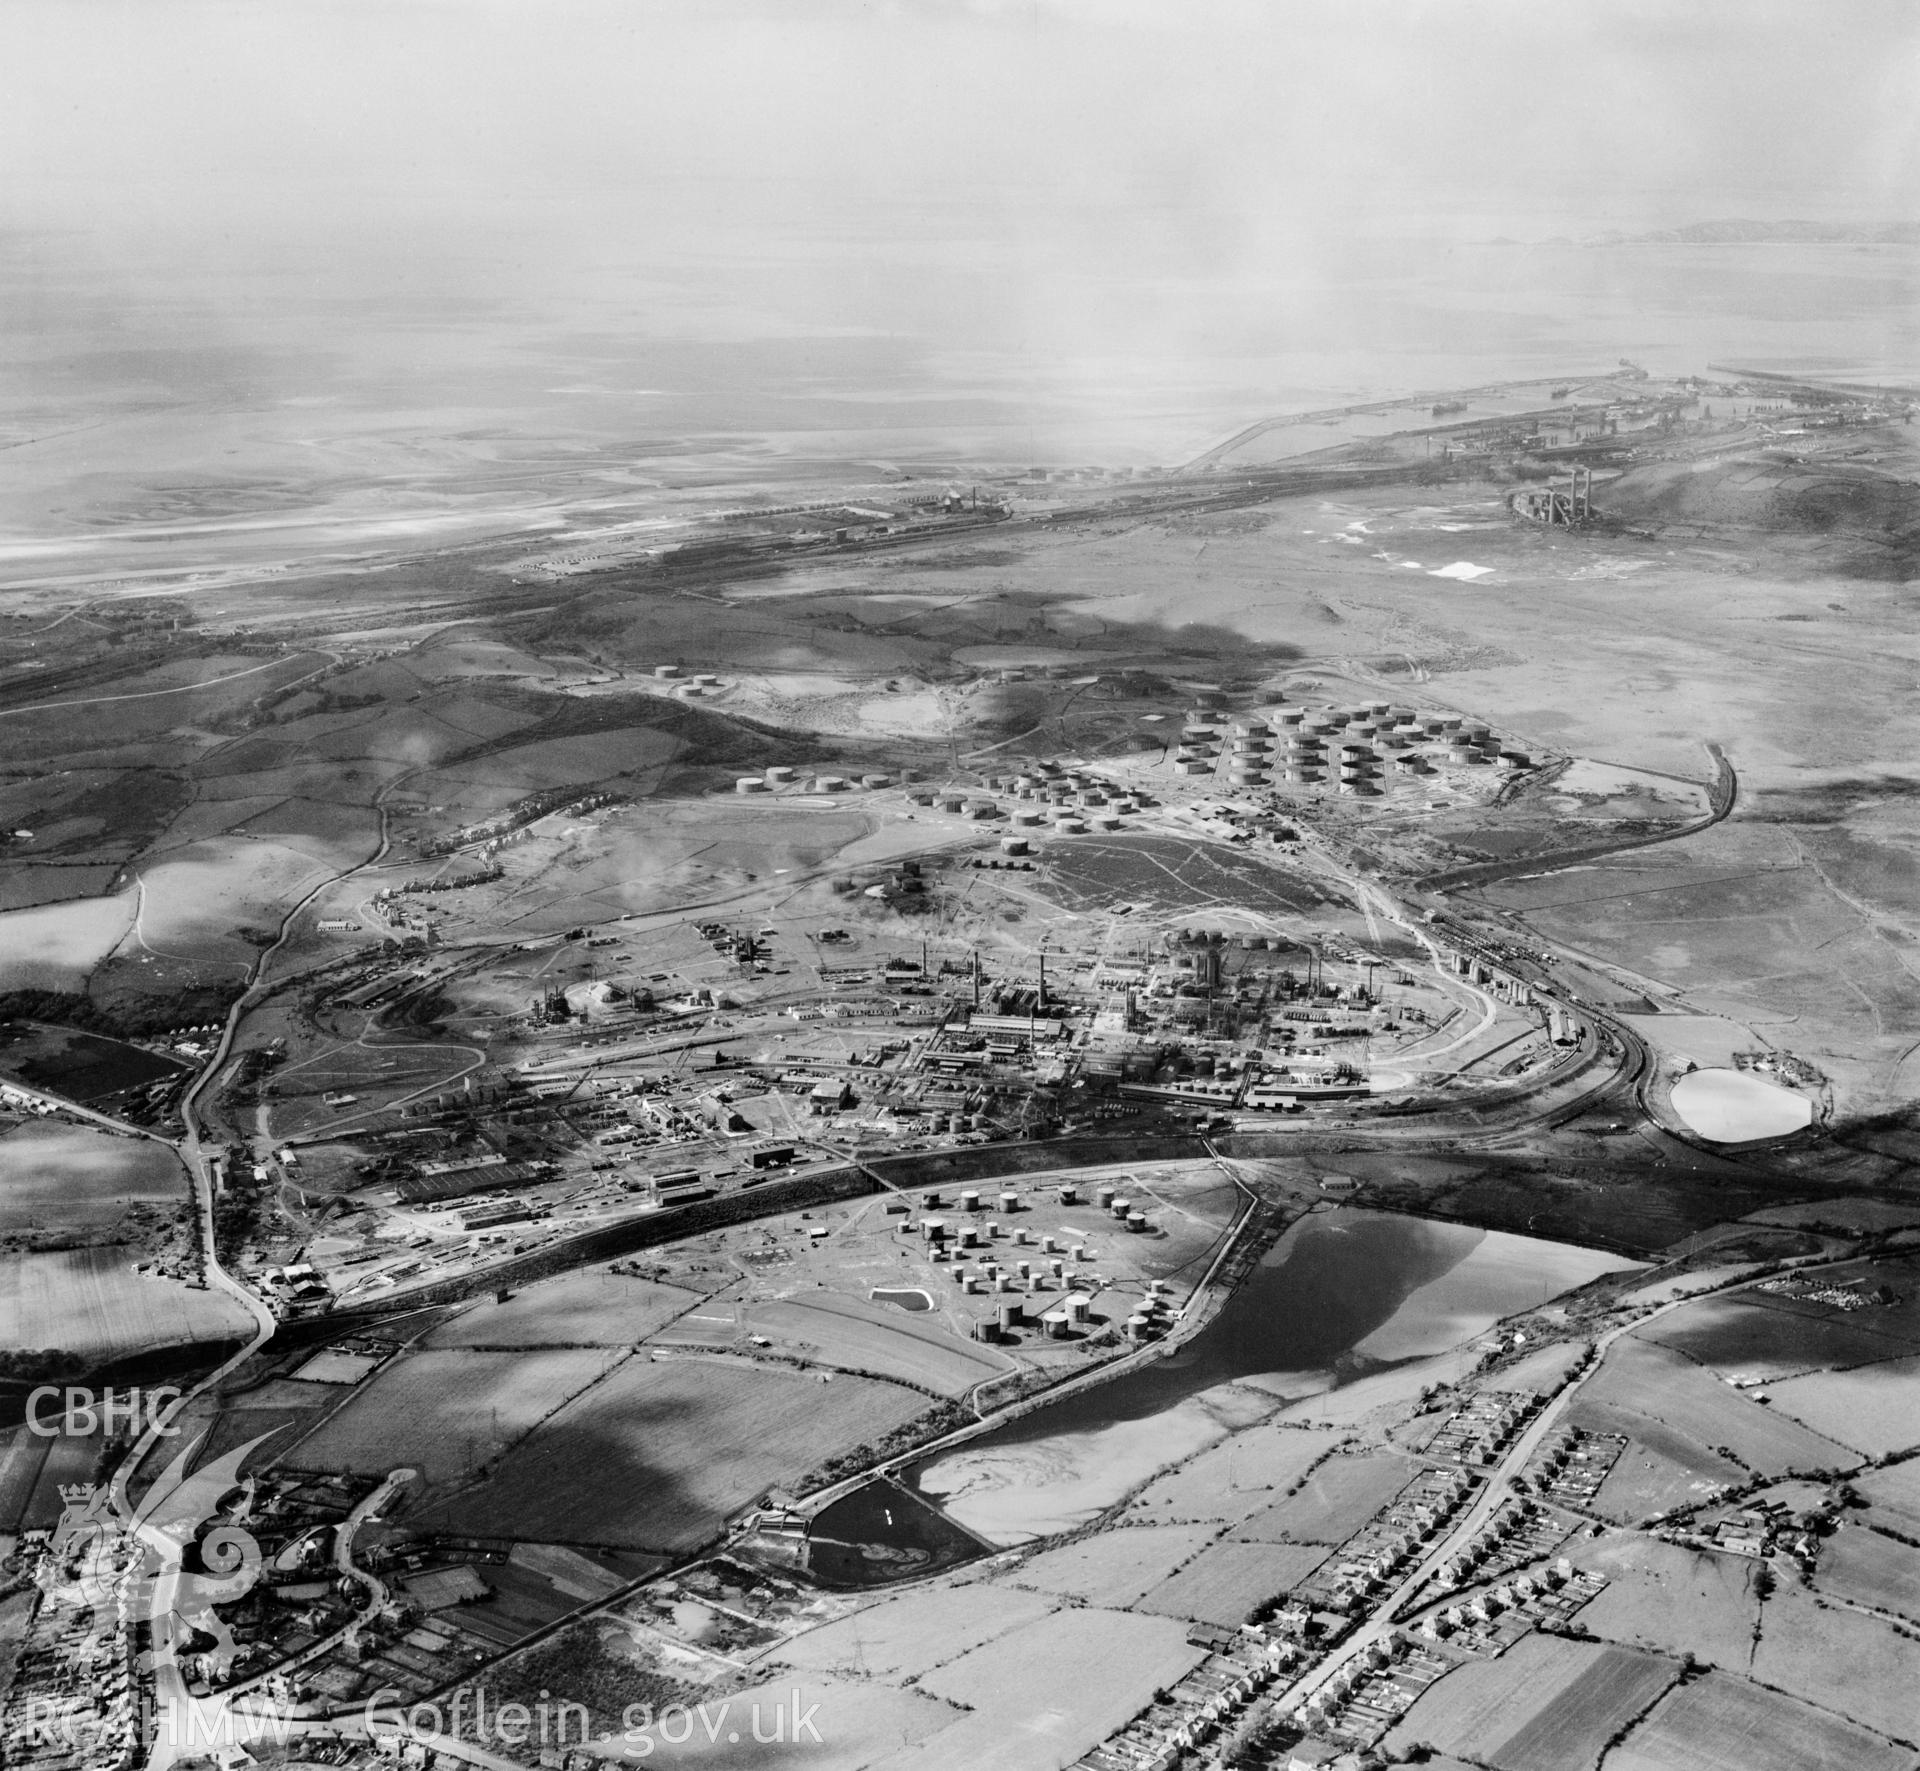 View of Llandarcy Anglo Iranian oil refinery